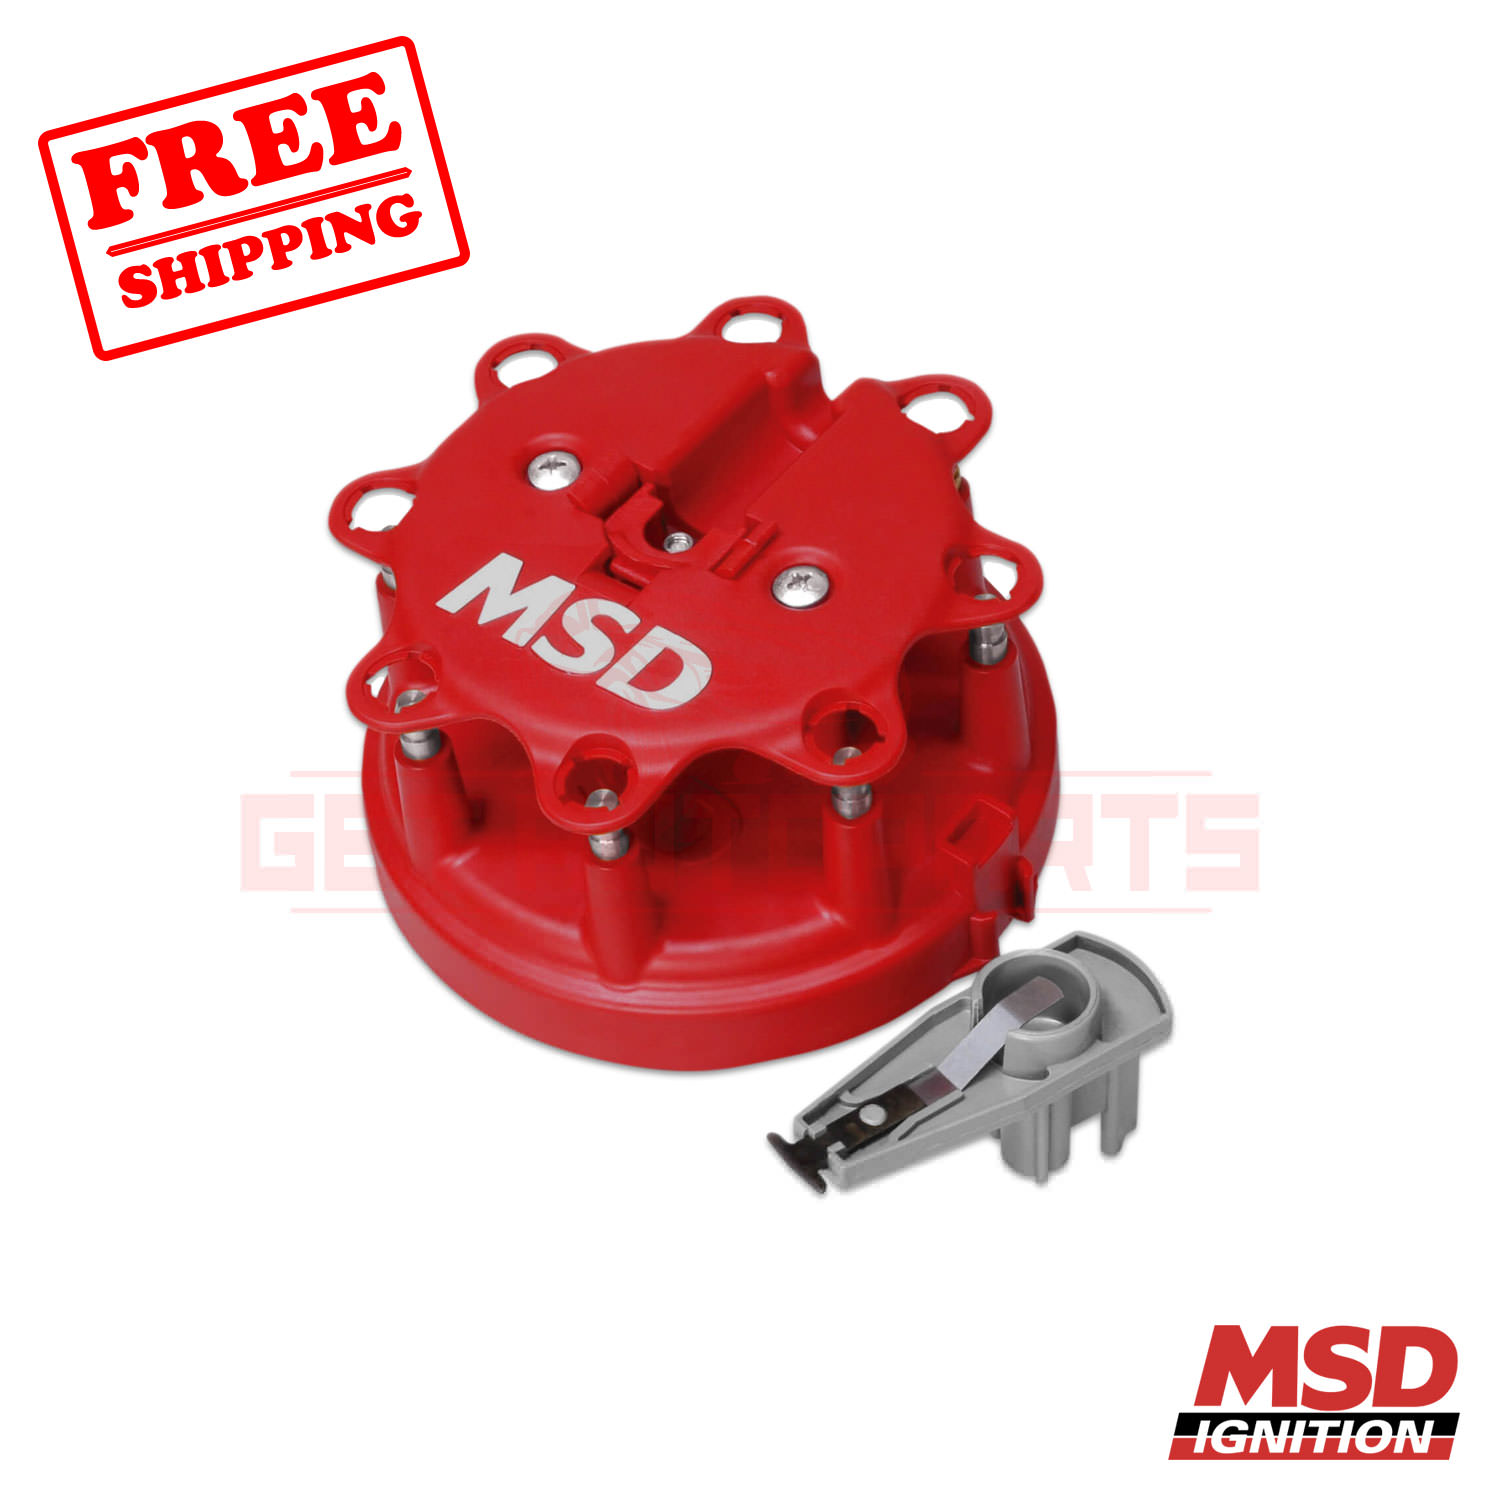 MSD Distributor Cap and Rotor Kit Club for Finally resale start Econoline Ford E-250 Soldering